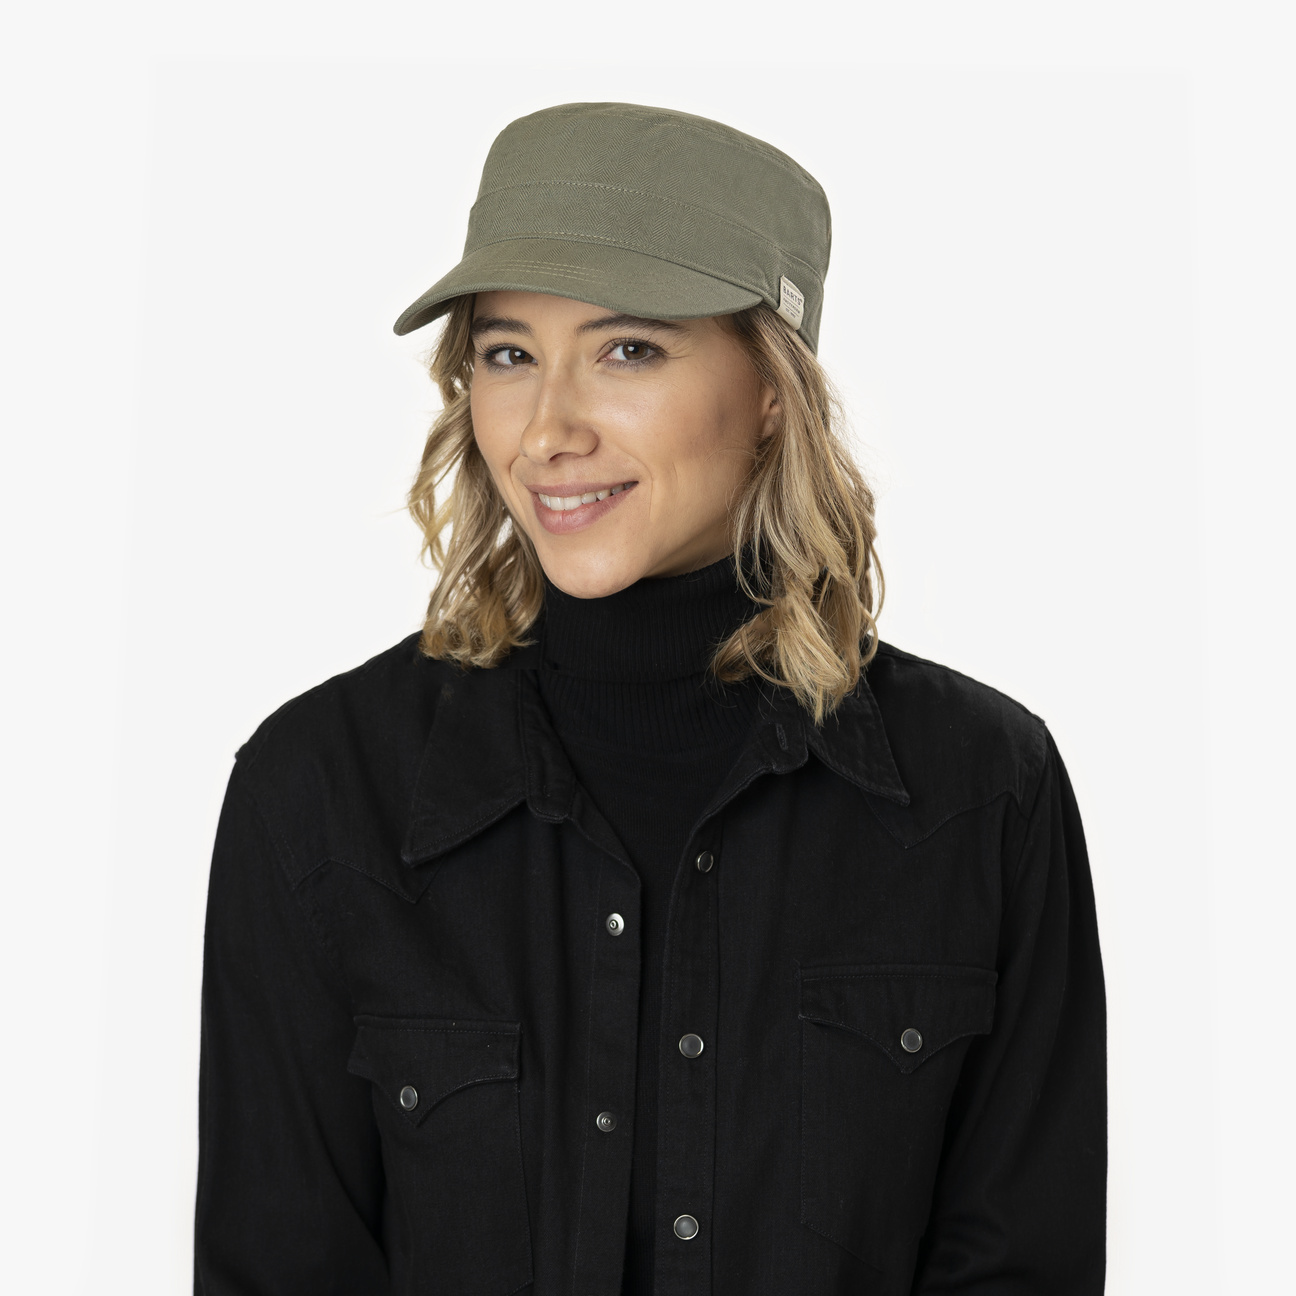 389,00 - Army Cap Montania by Barts kr